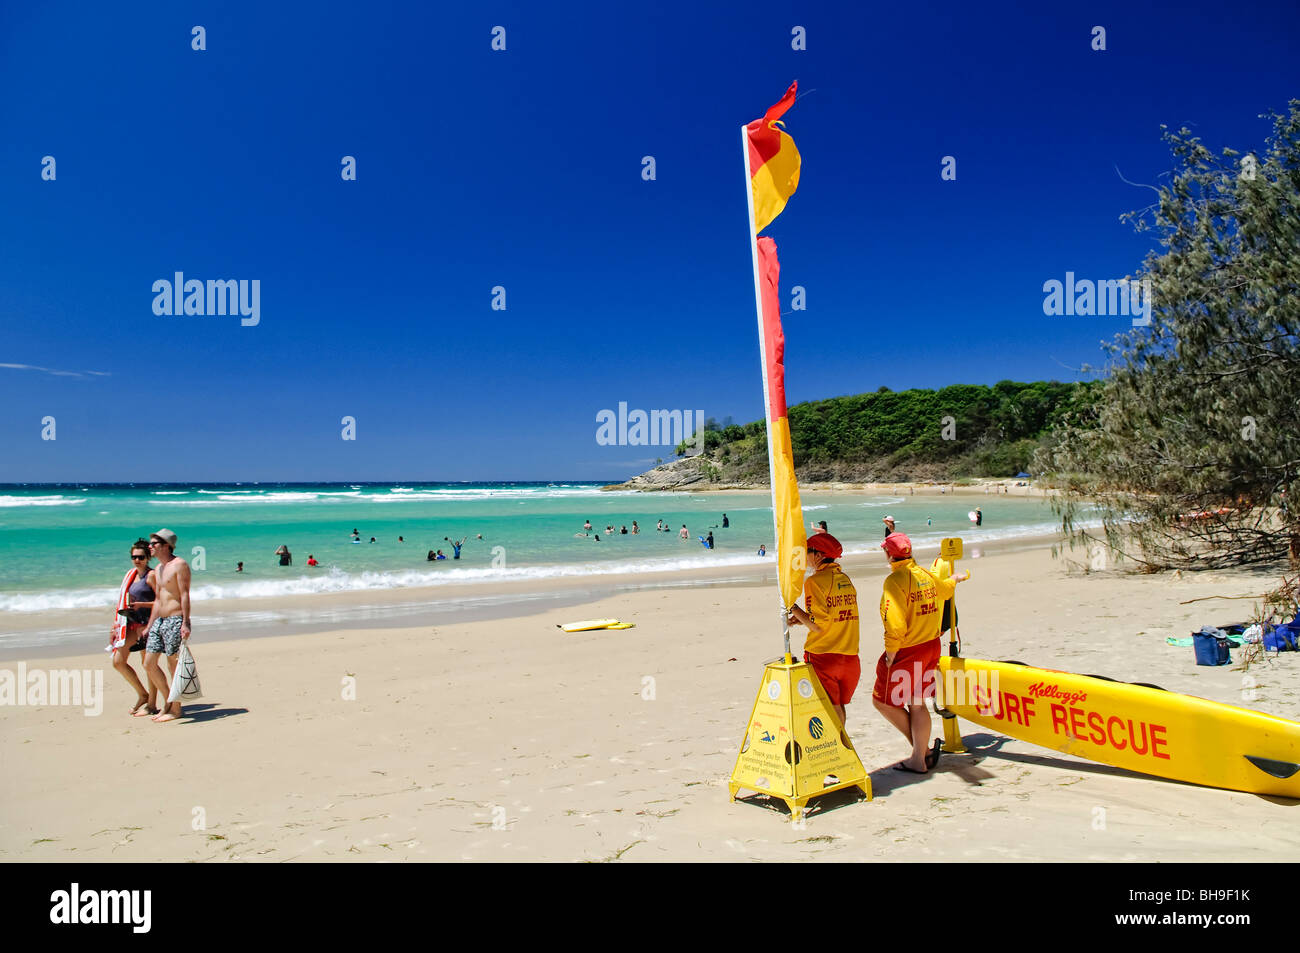 NORTH STRADBROKE ISLAND, Australia - Lifesavers on duty at Cylinder Beach on North Stradbroke Island, Queensland, Australia. The flags mark the edges of the area recommended for swimming, as swimmers are encourage to stay between the flags. North Stradbroke Island, just off Queensland's capital city of Brisbane, is the world's second largest sand island and, with its miles of sandy beaches, a popular summer holiday destination. Stock Photo